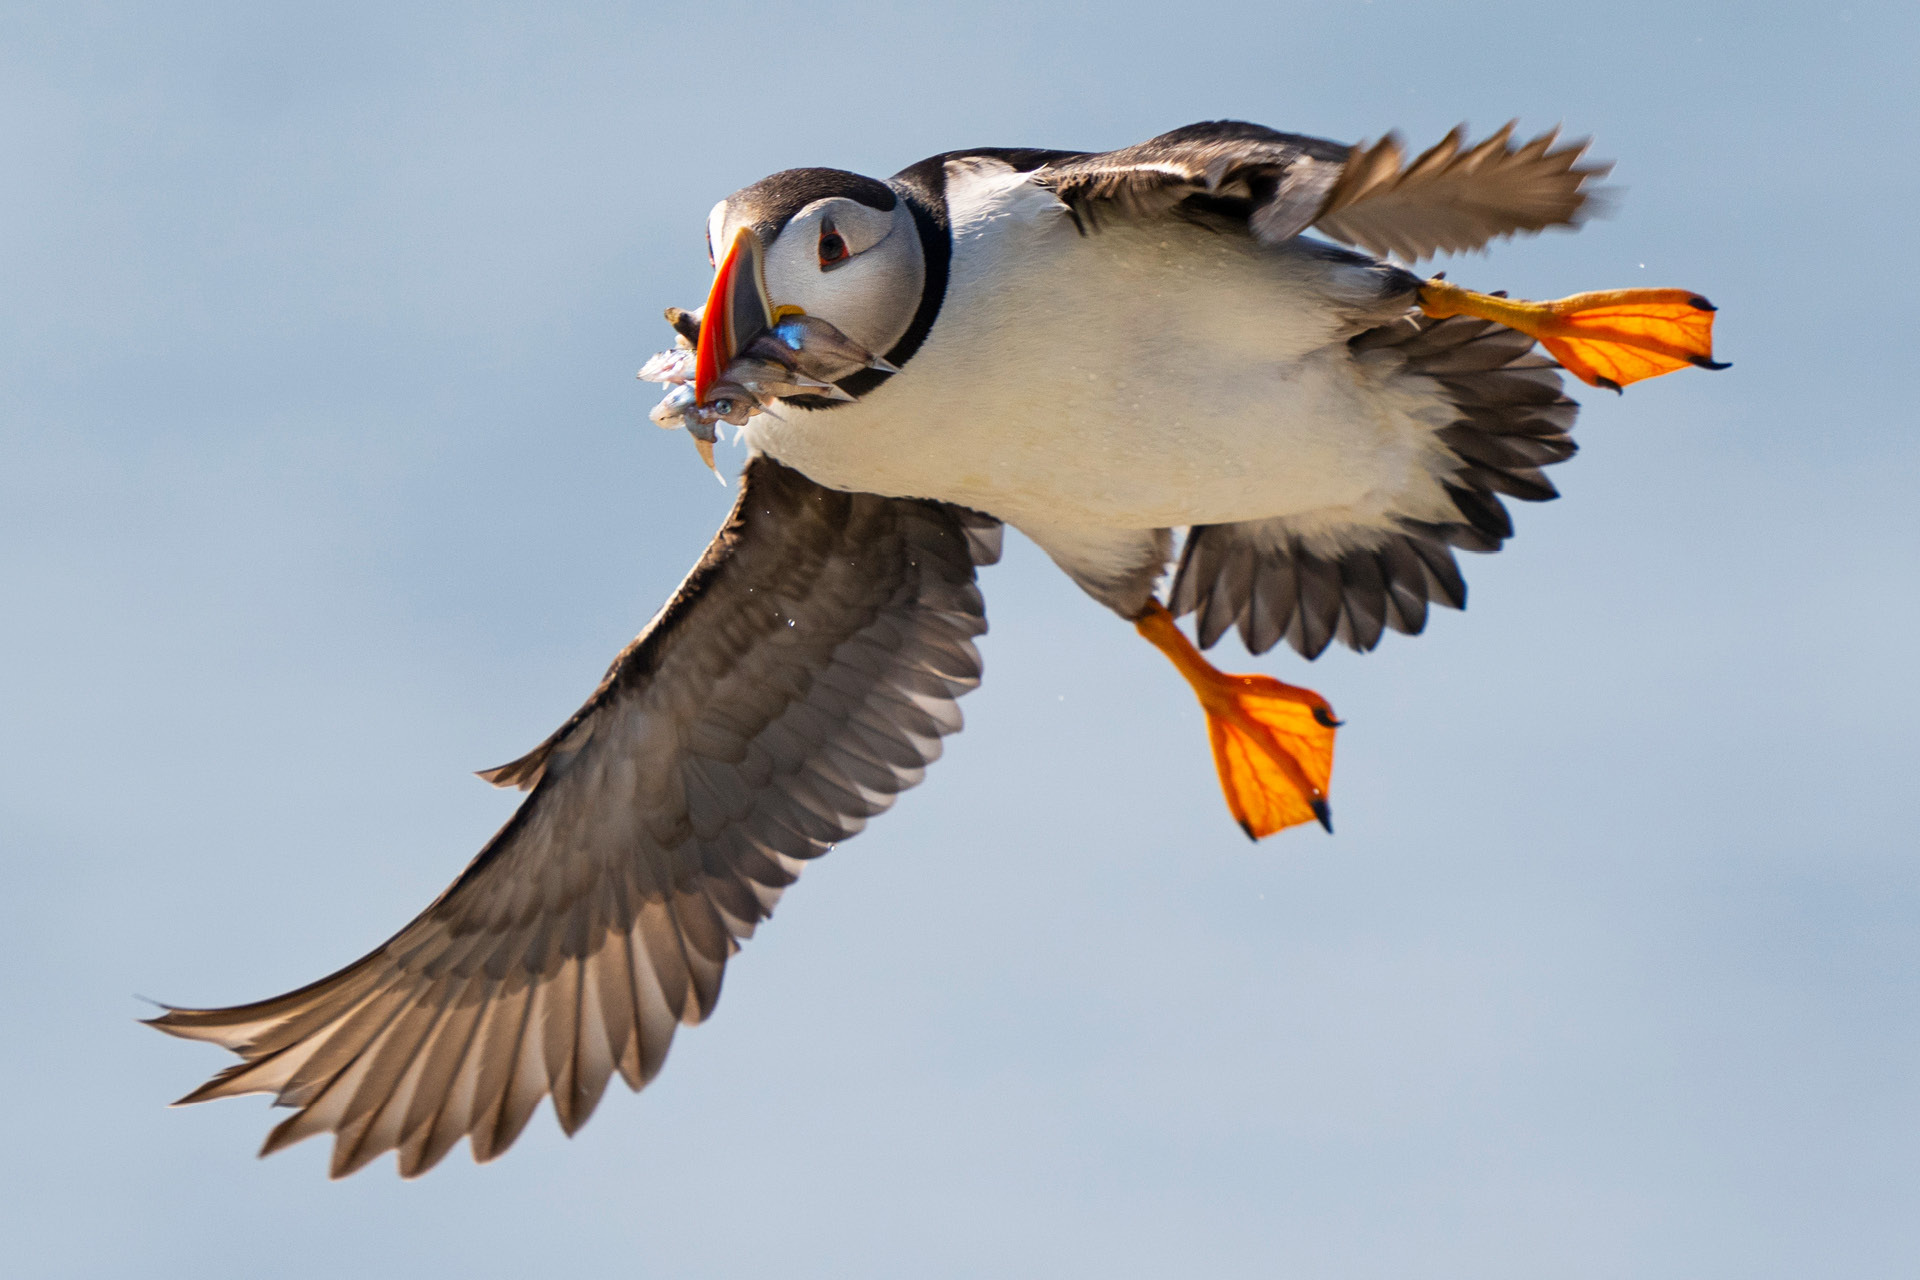 TIME for Kids  Puffins on the Rise